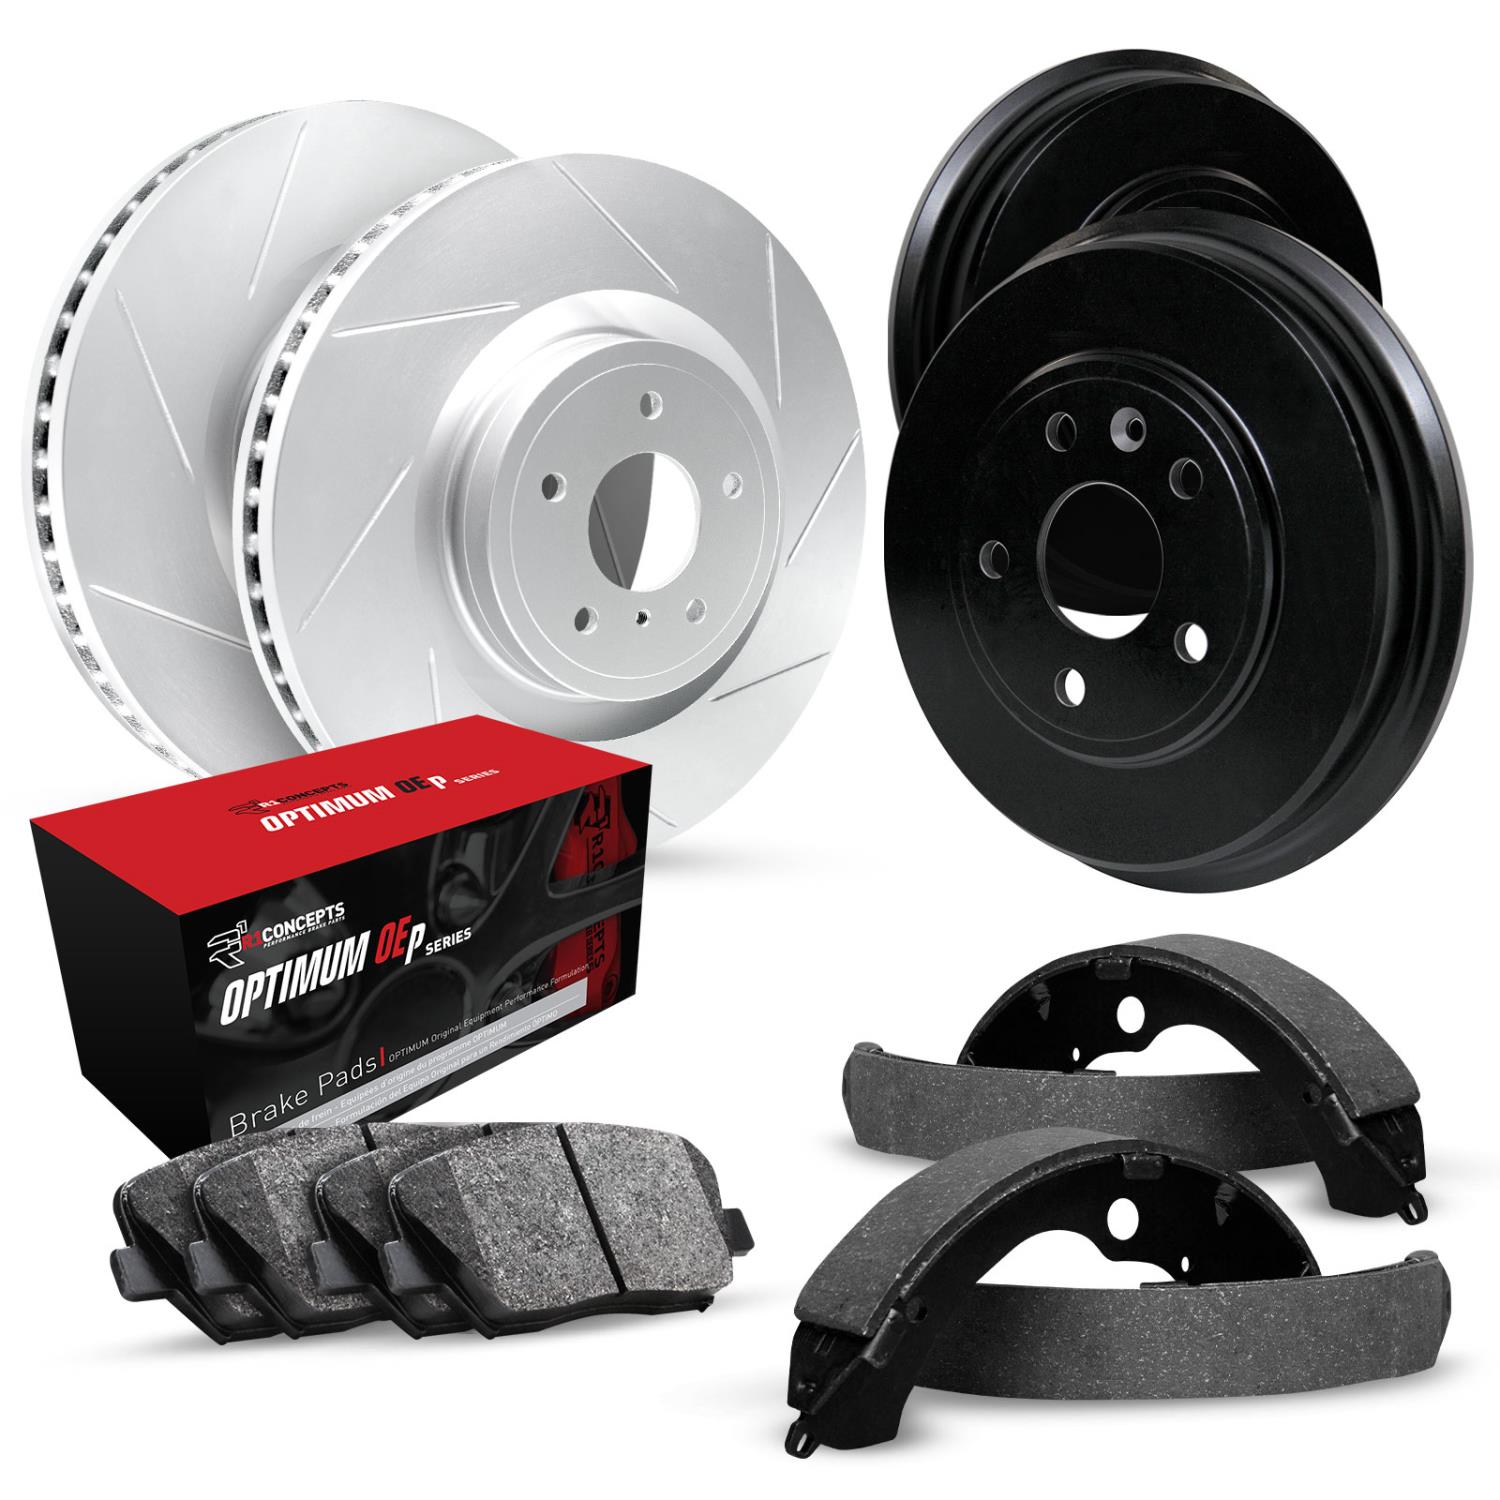 GEO-Carbon Slotted Brake Rotor & Drum Set w/Optimum OE Pads & Shoes, 1997-2003 Ford/Lincoln/Mercury/Mazda